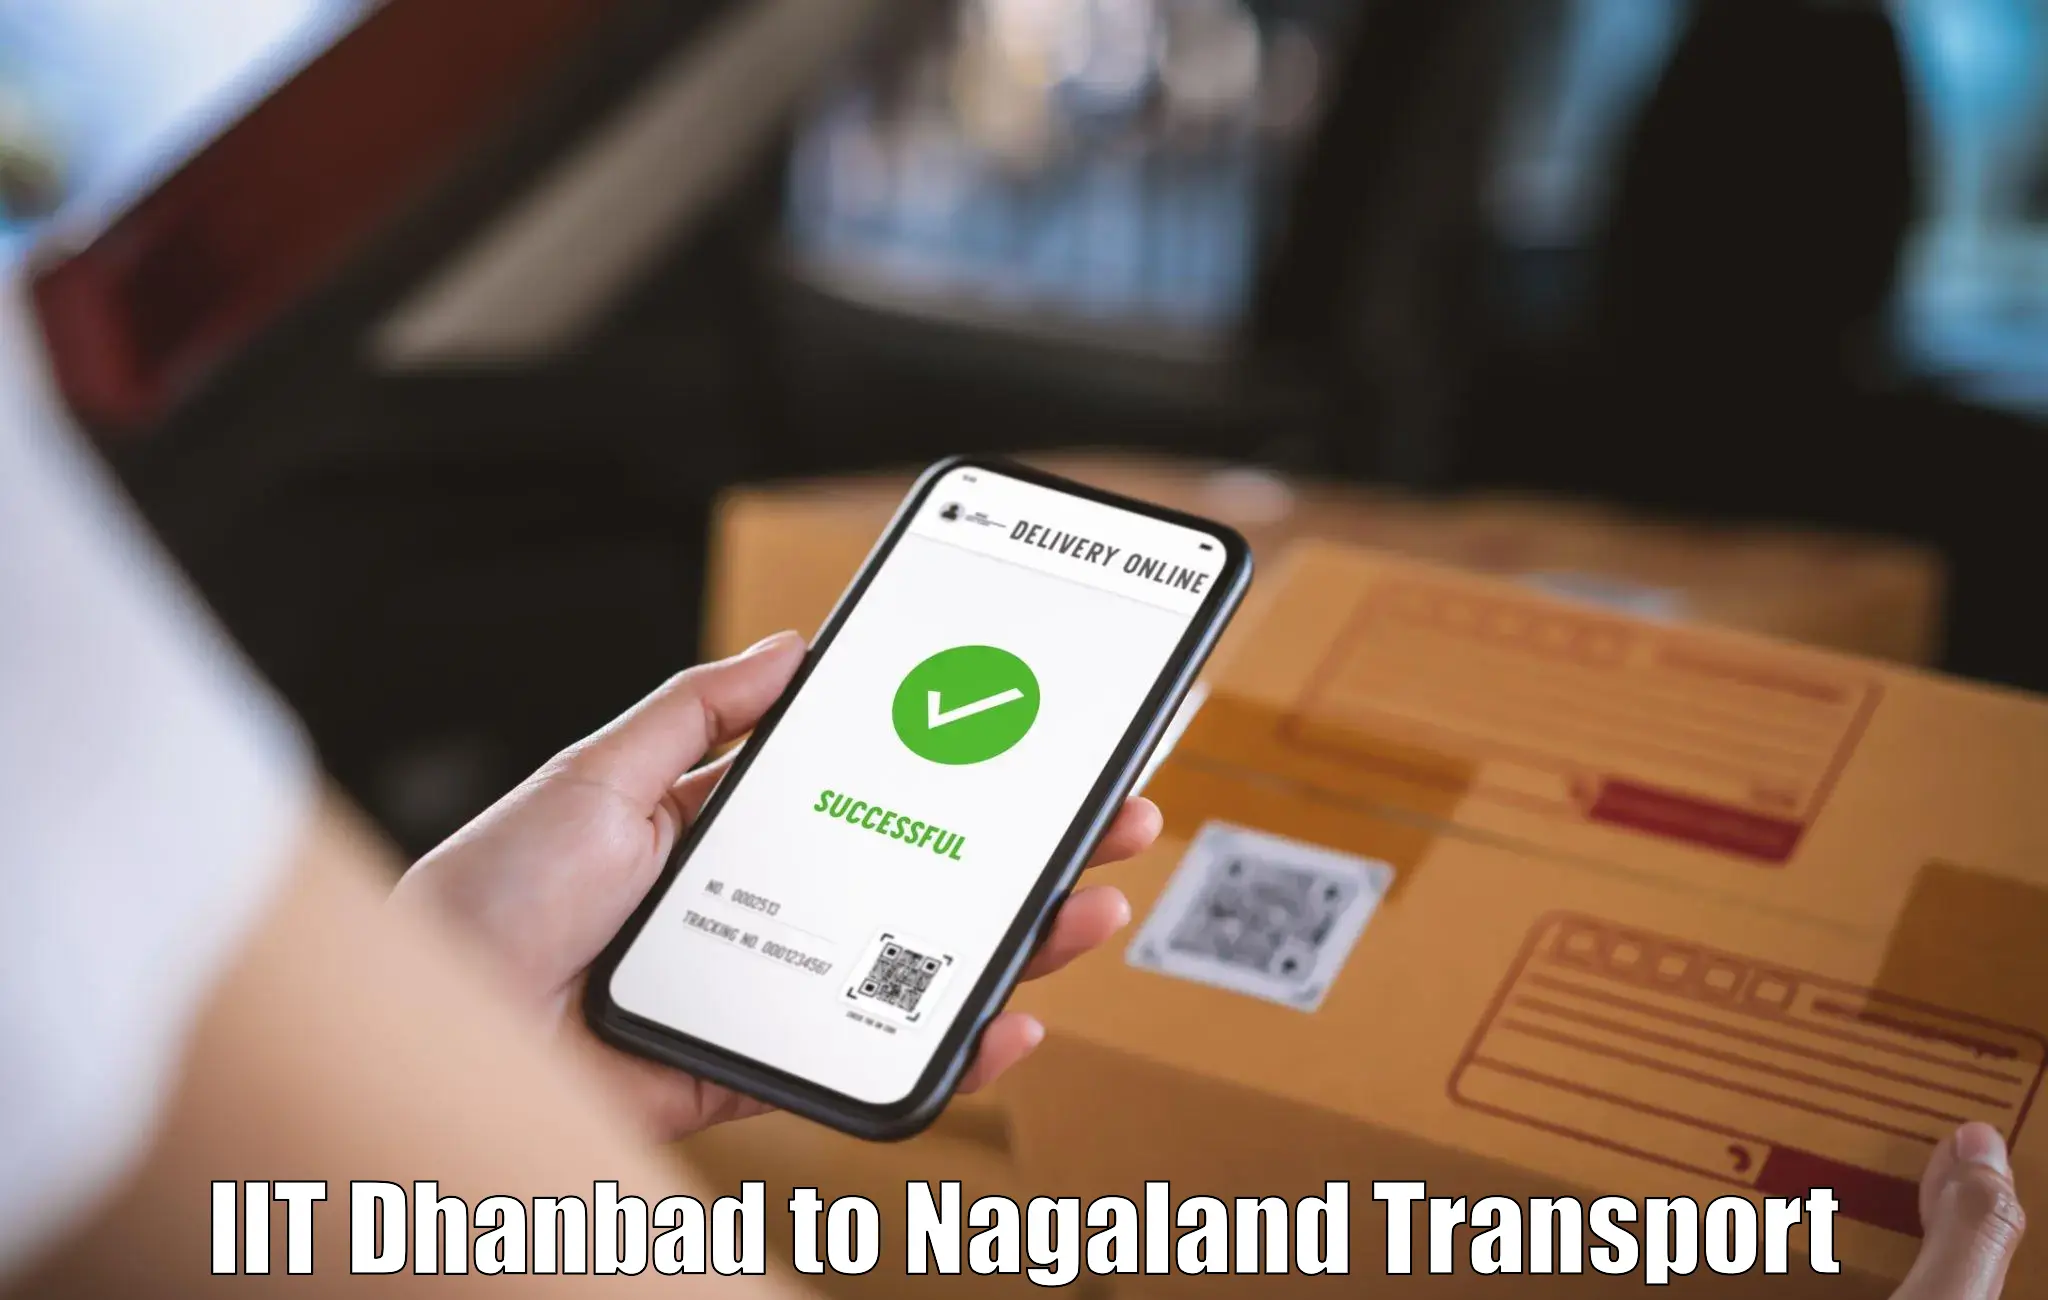 Road transport online services IIT Dhanbad to Dimapur